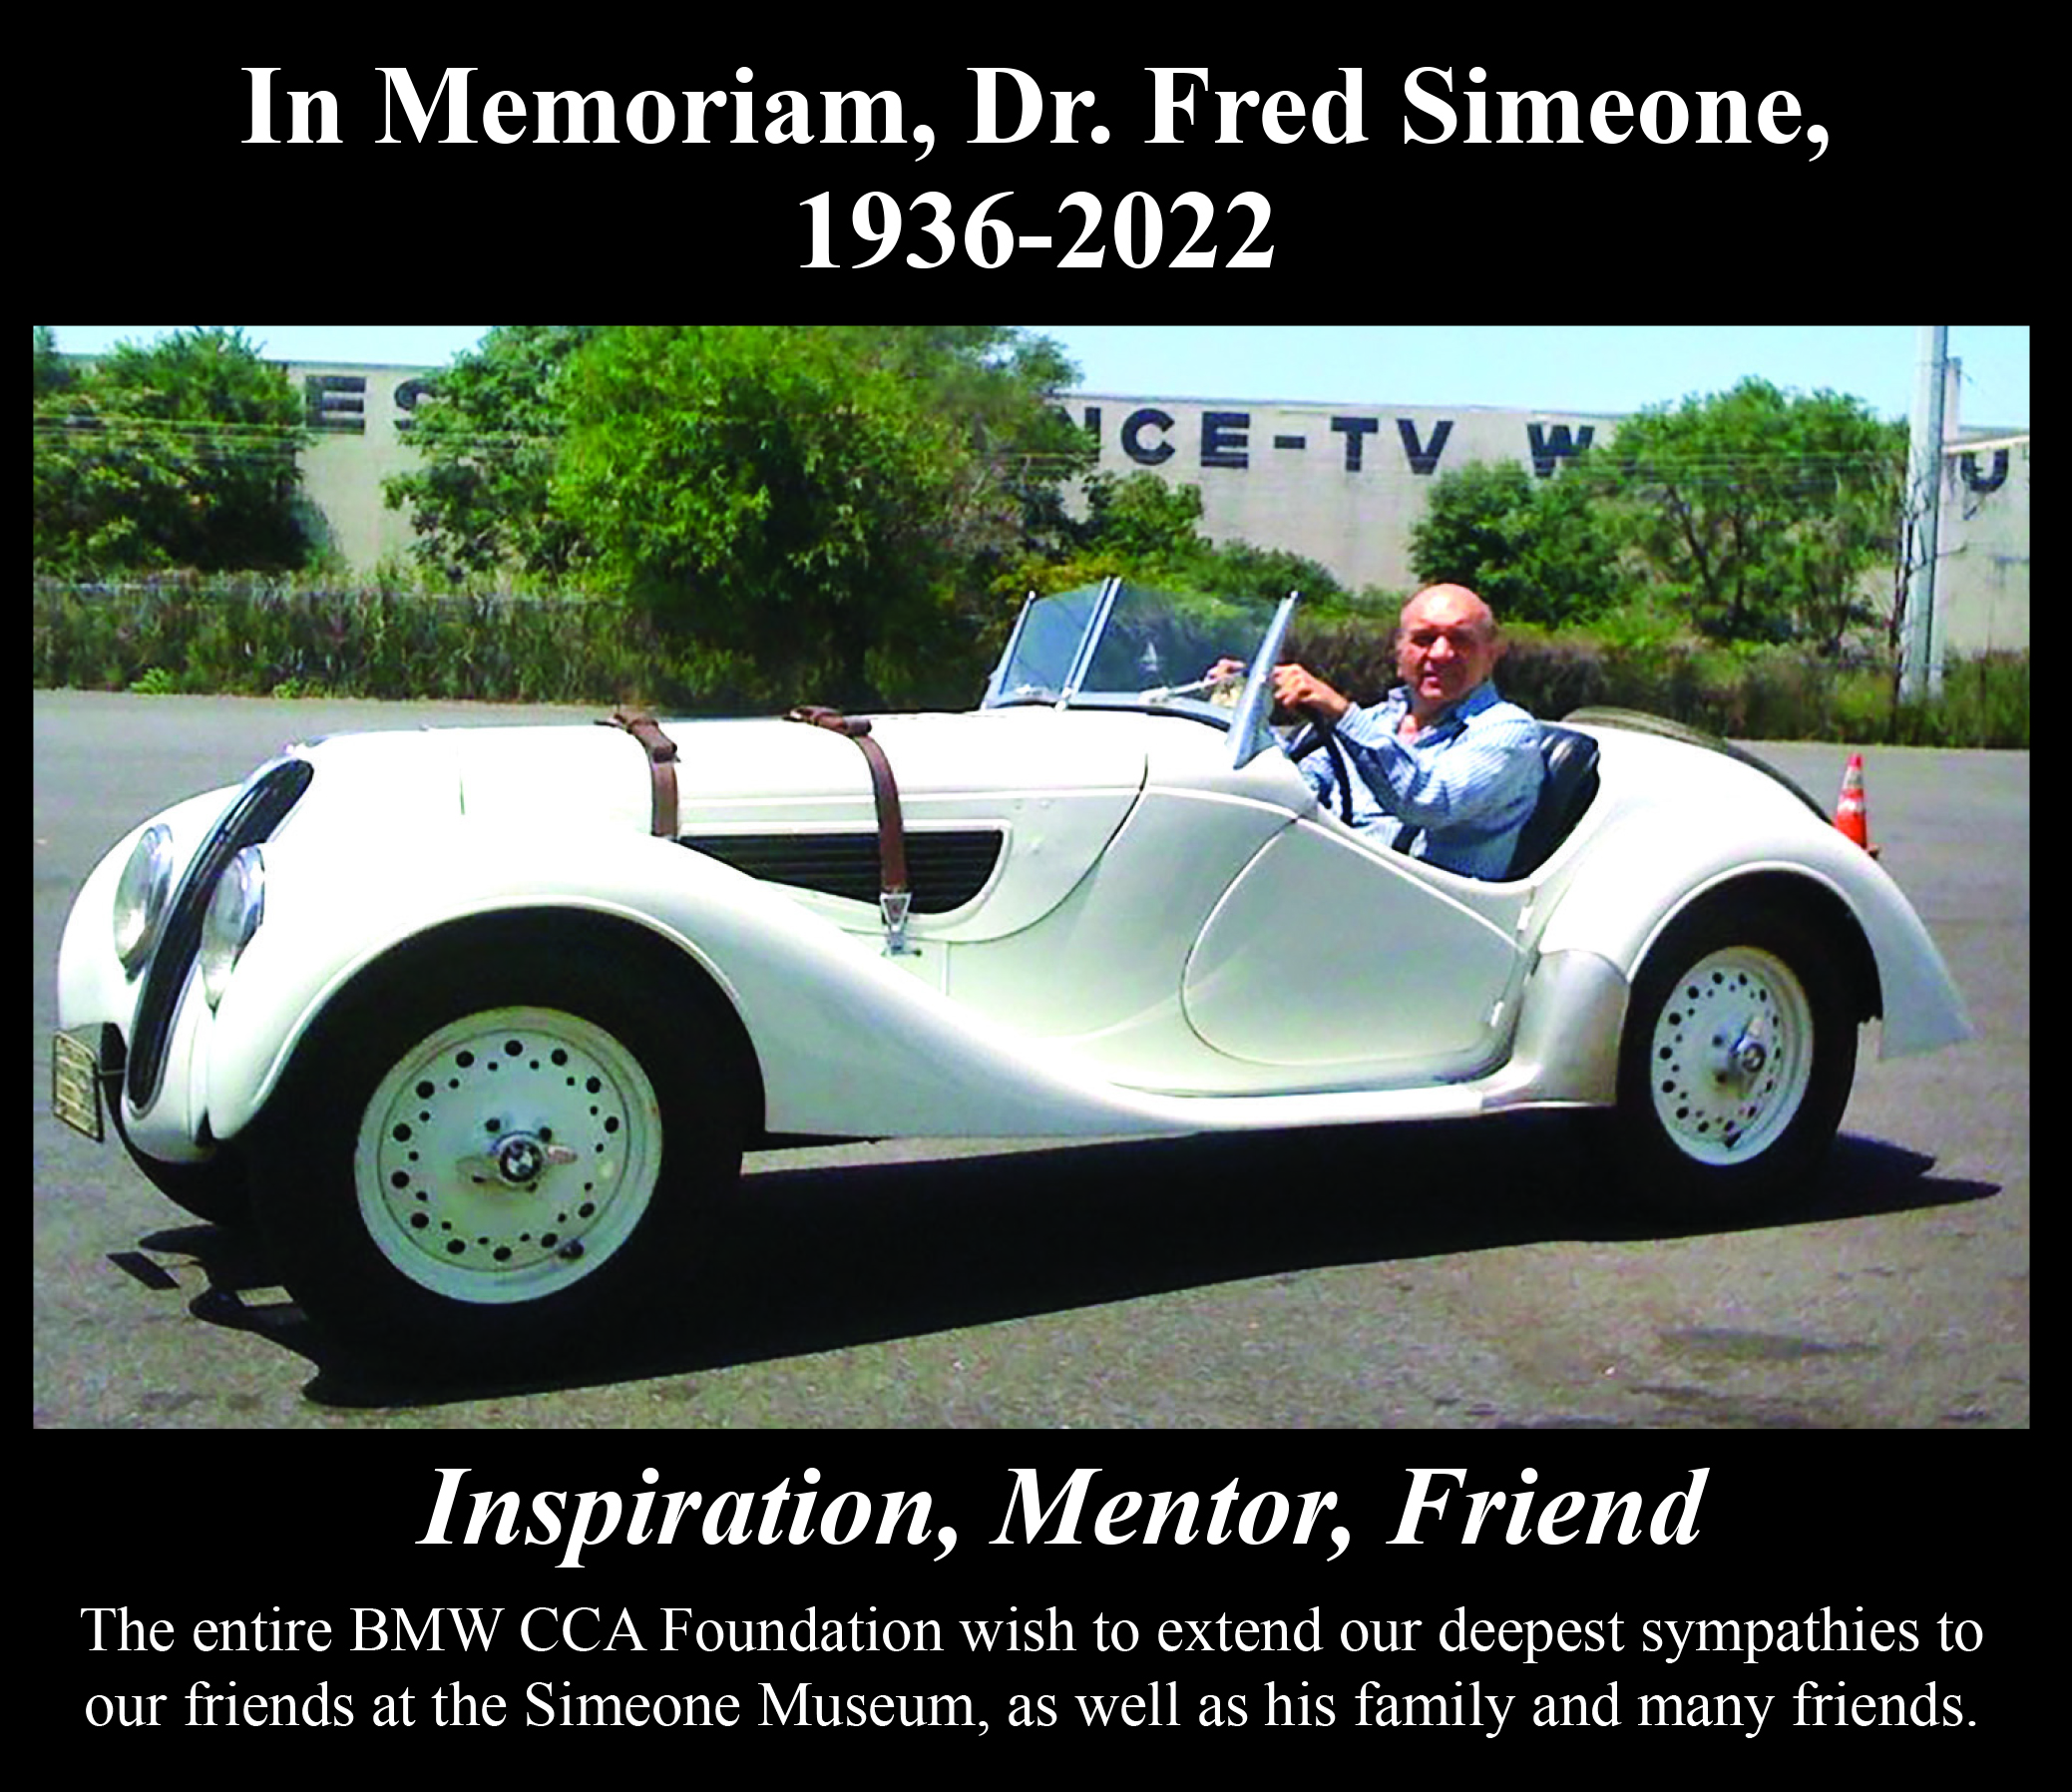 Photograph of Doctor Fred Simeone, in memoriam. Text on image: The entire BMW CCA Foundation wish to extend our deepest sympathies to our friends at the Simeone Museum, as well as his family and many friends